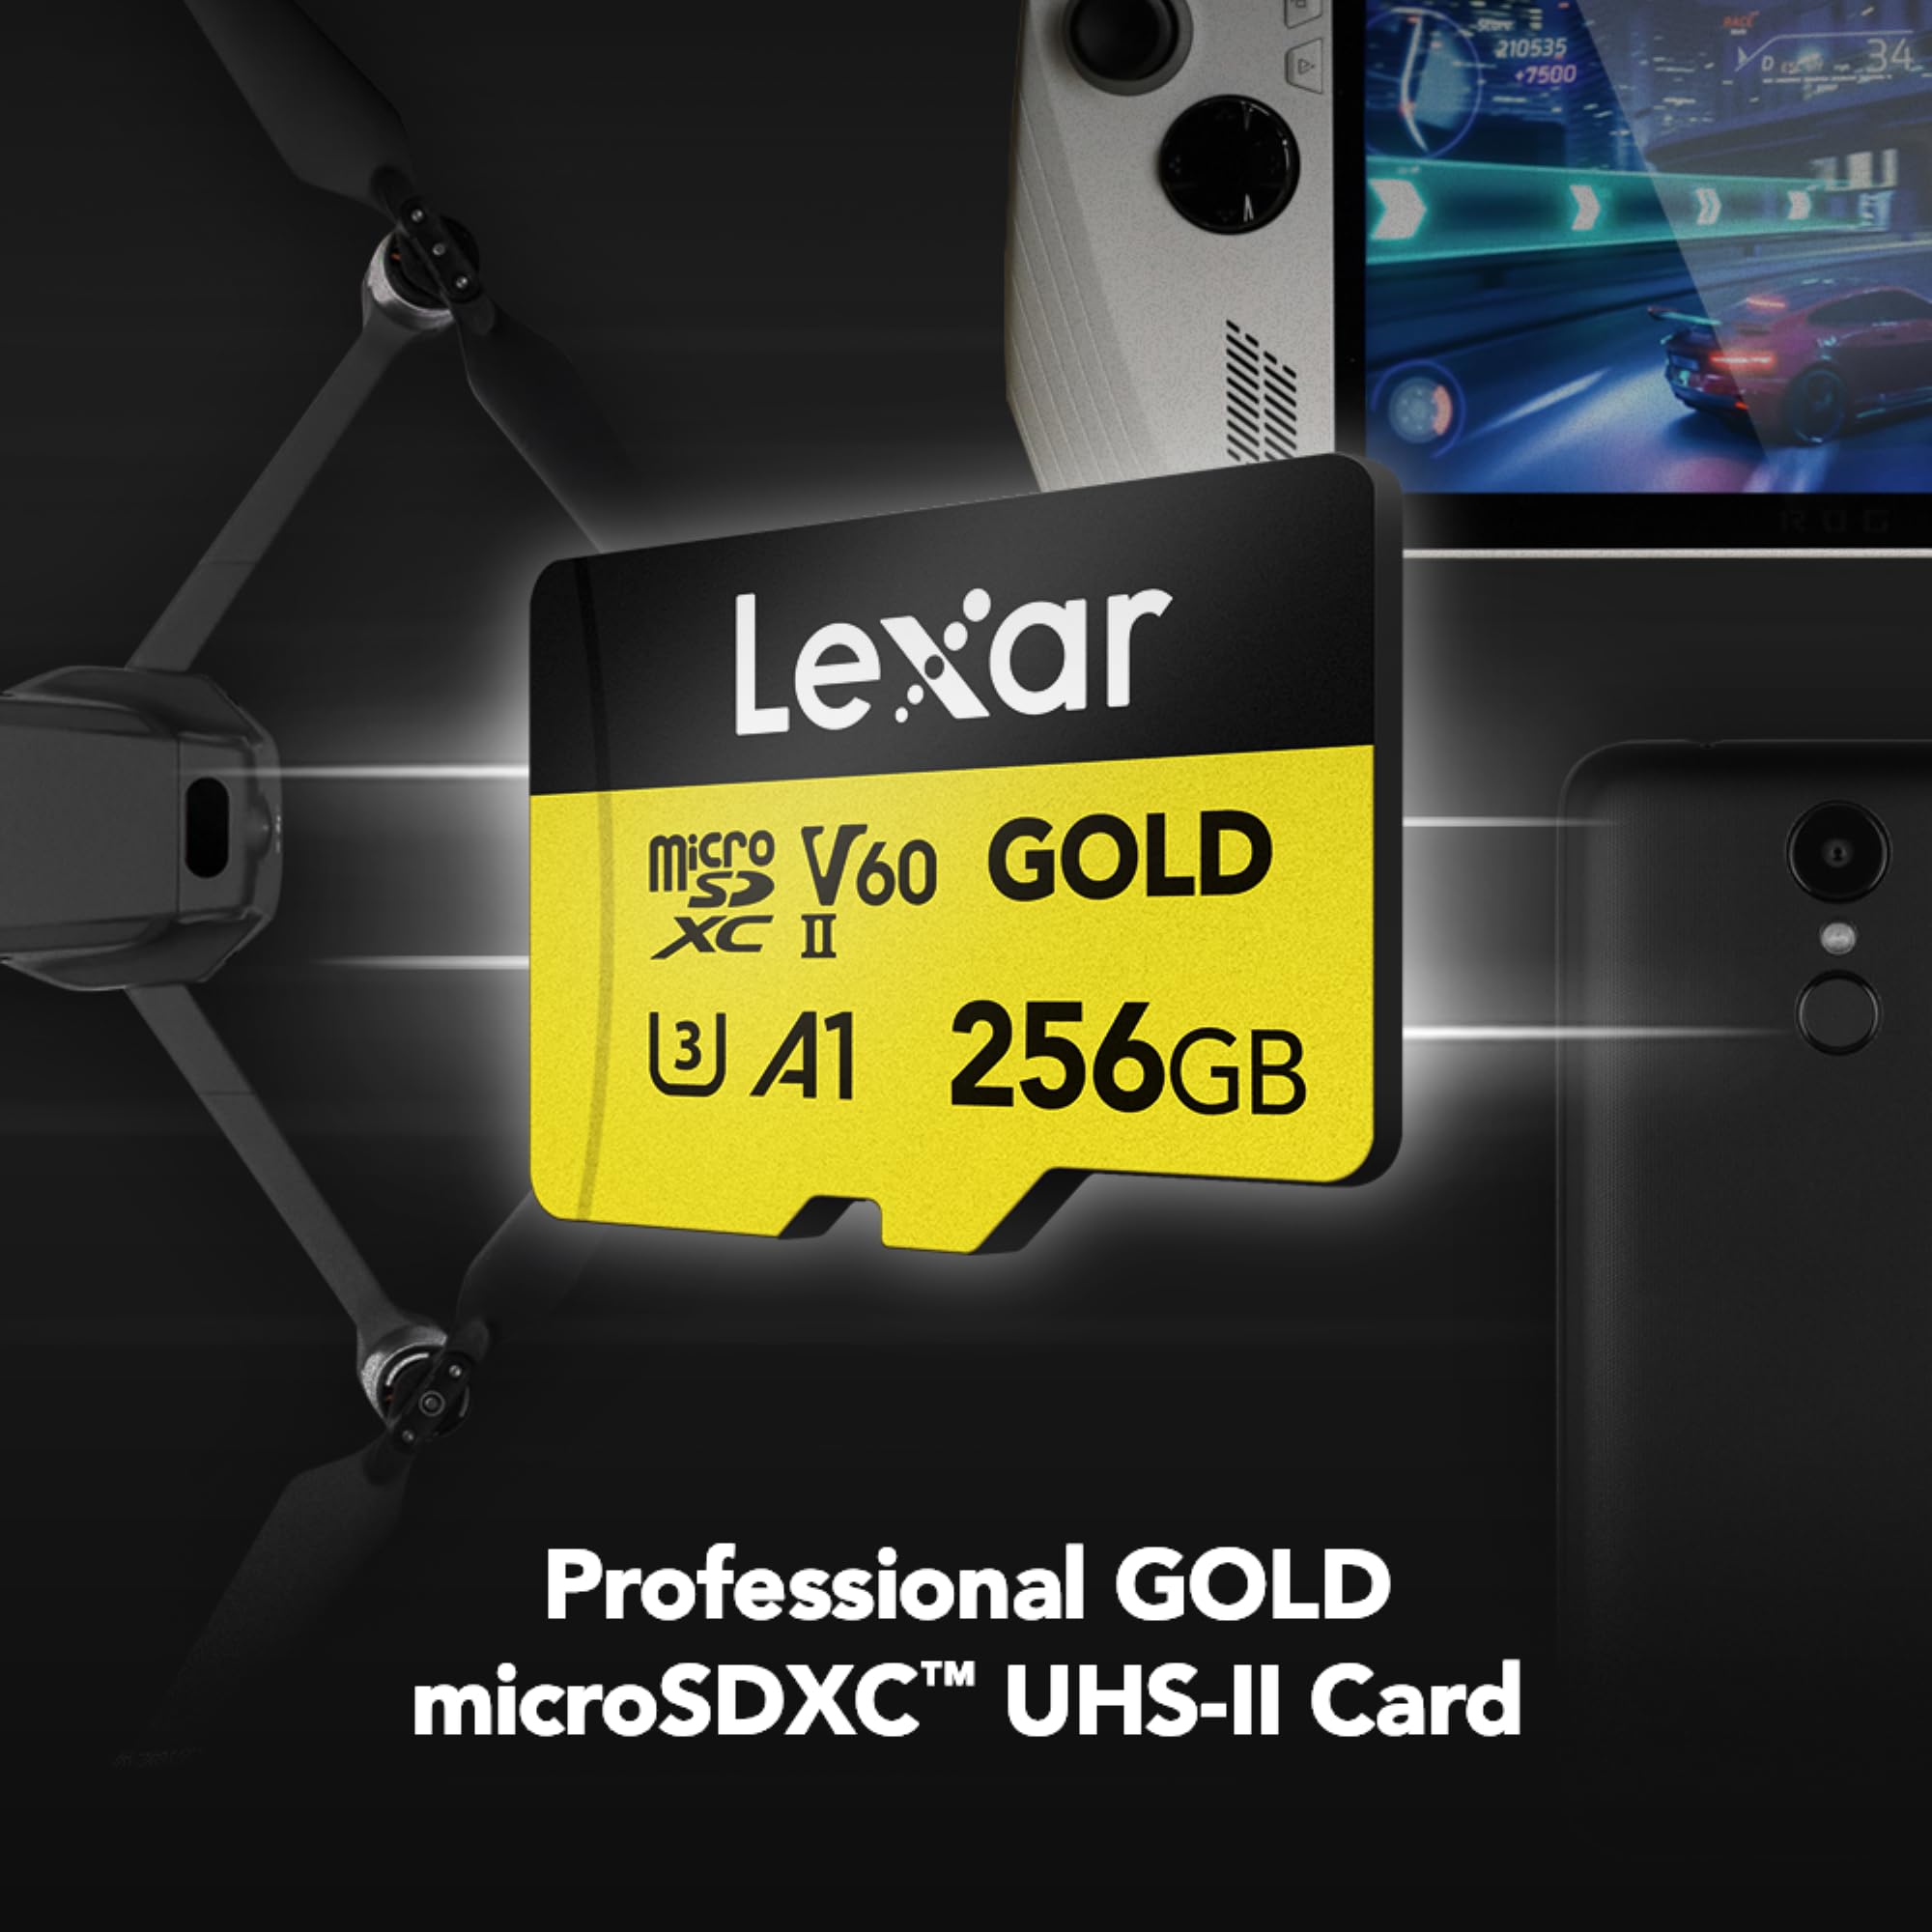 Lexar Professional Gold 256GB microSDXC UHS-II Card, C10, U3, V60, A1, Full HD, 4K UHD, Up to 280/180 MB/s, for Drones, Action Cameras, Portable Gaming Devices (LMSGOLD256G-BNNNG)